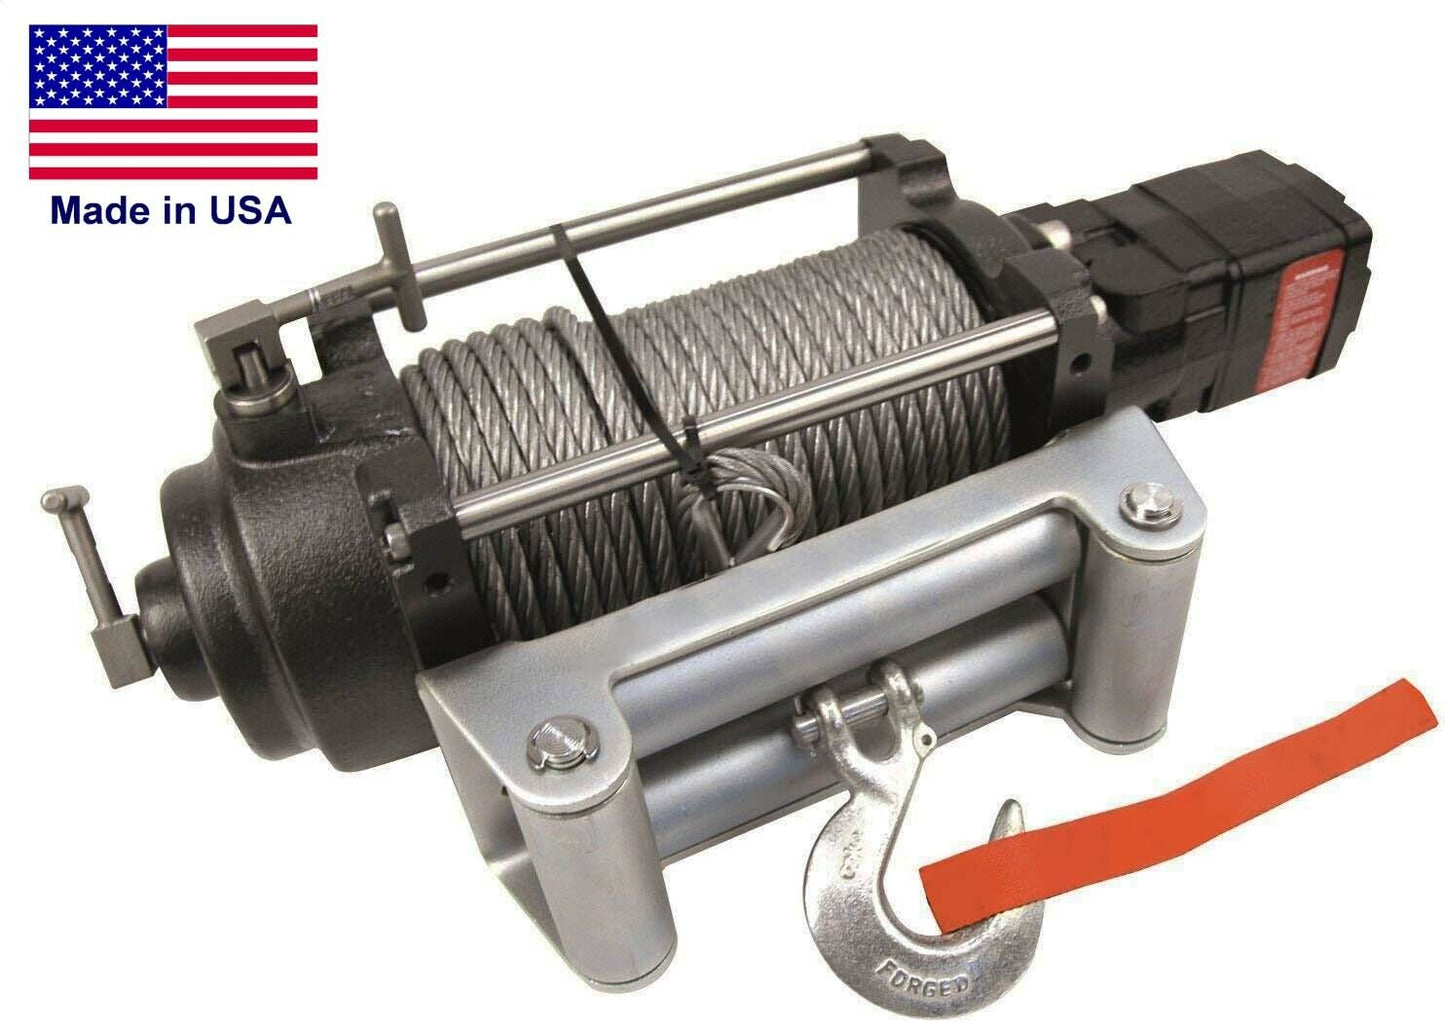 Hydraulic Winch for 78 to 96 FORD FULL - 12000 lb Cap - Waterproof - Reversible